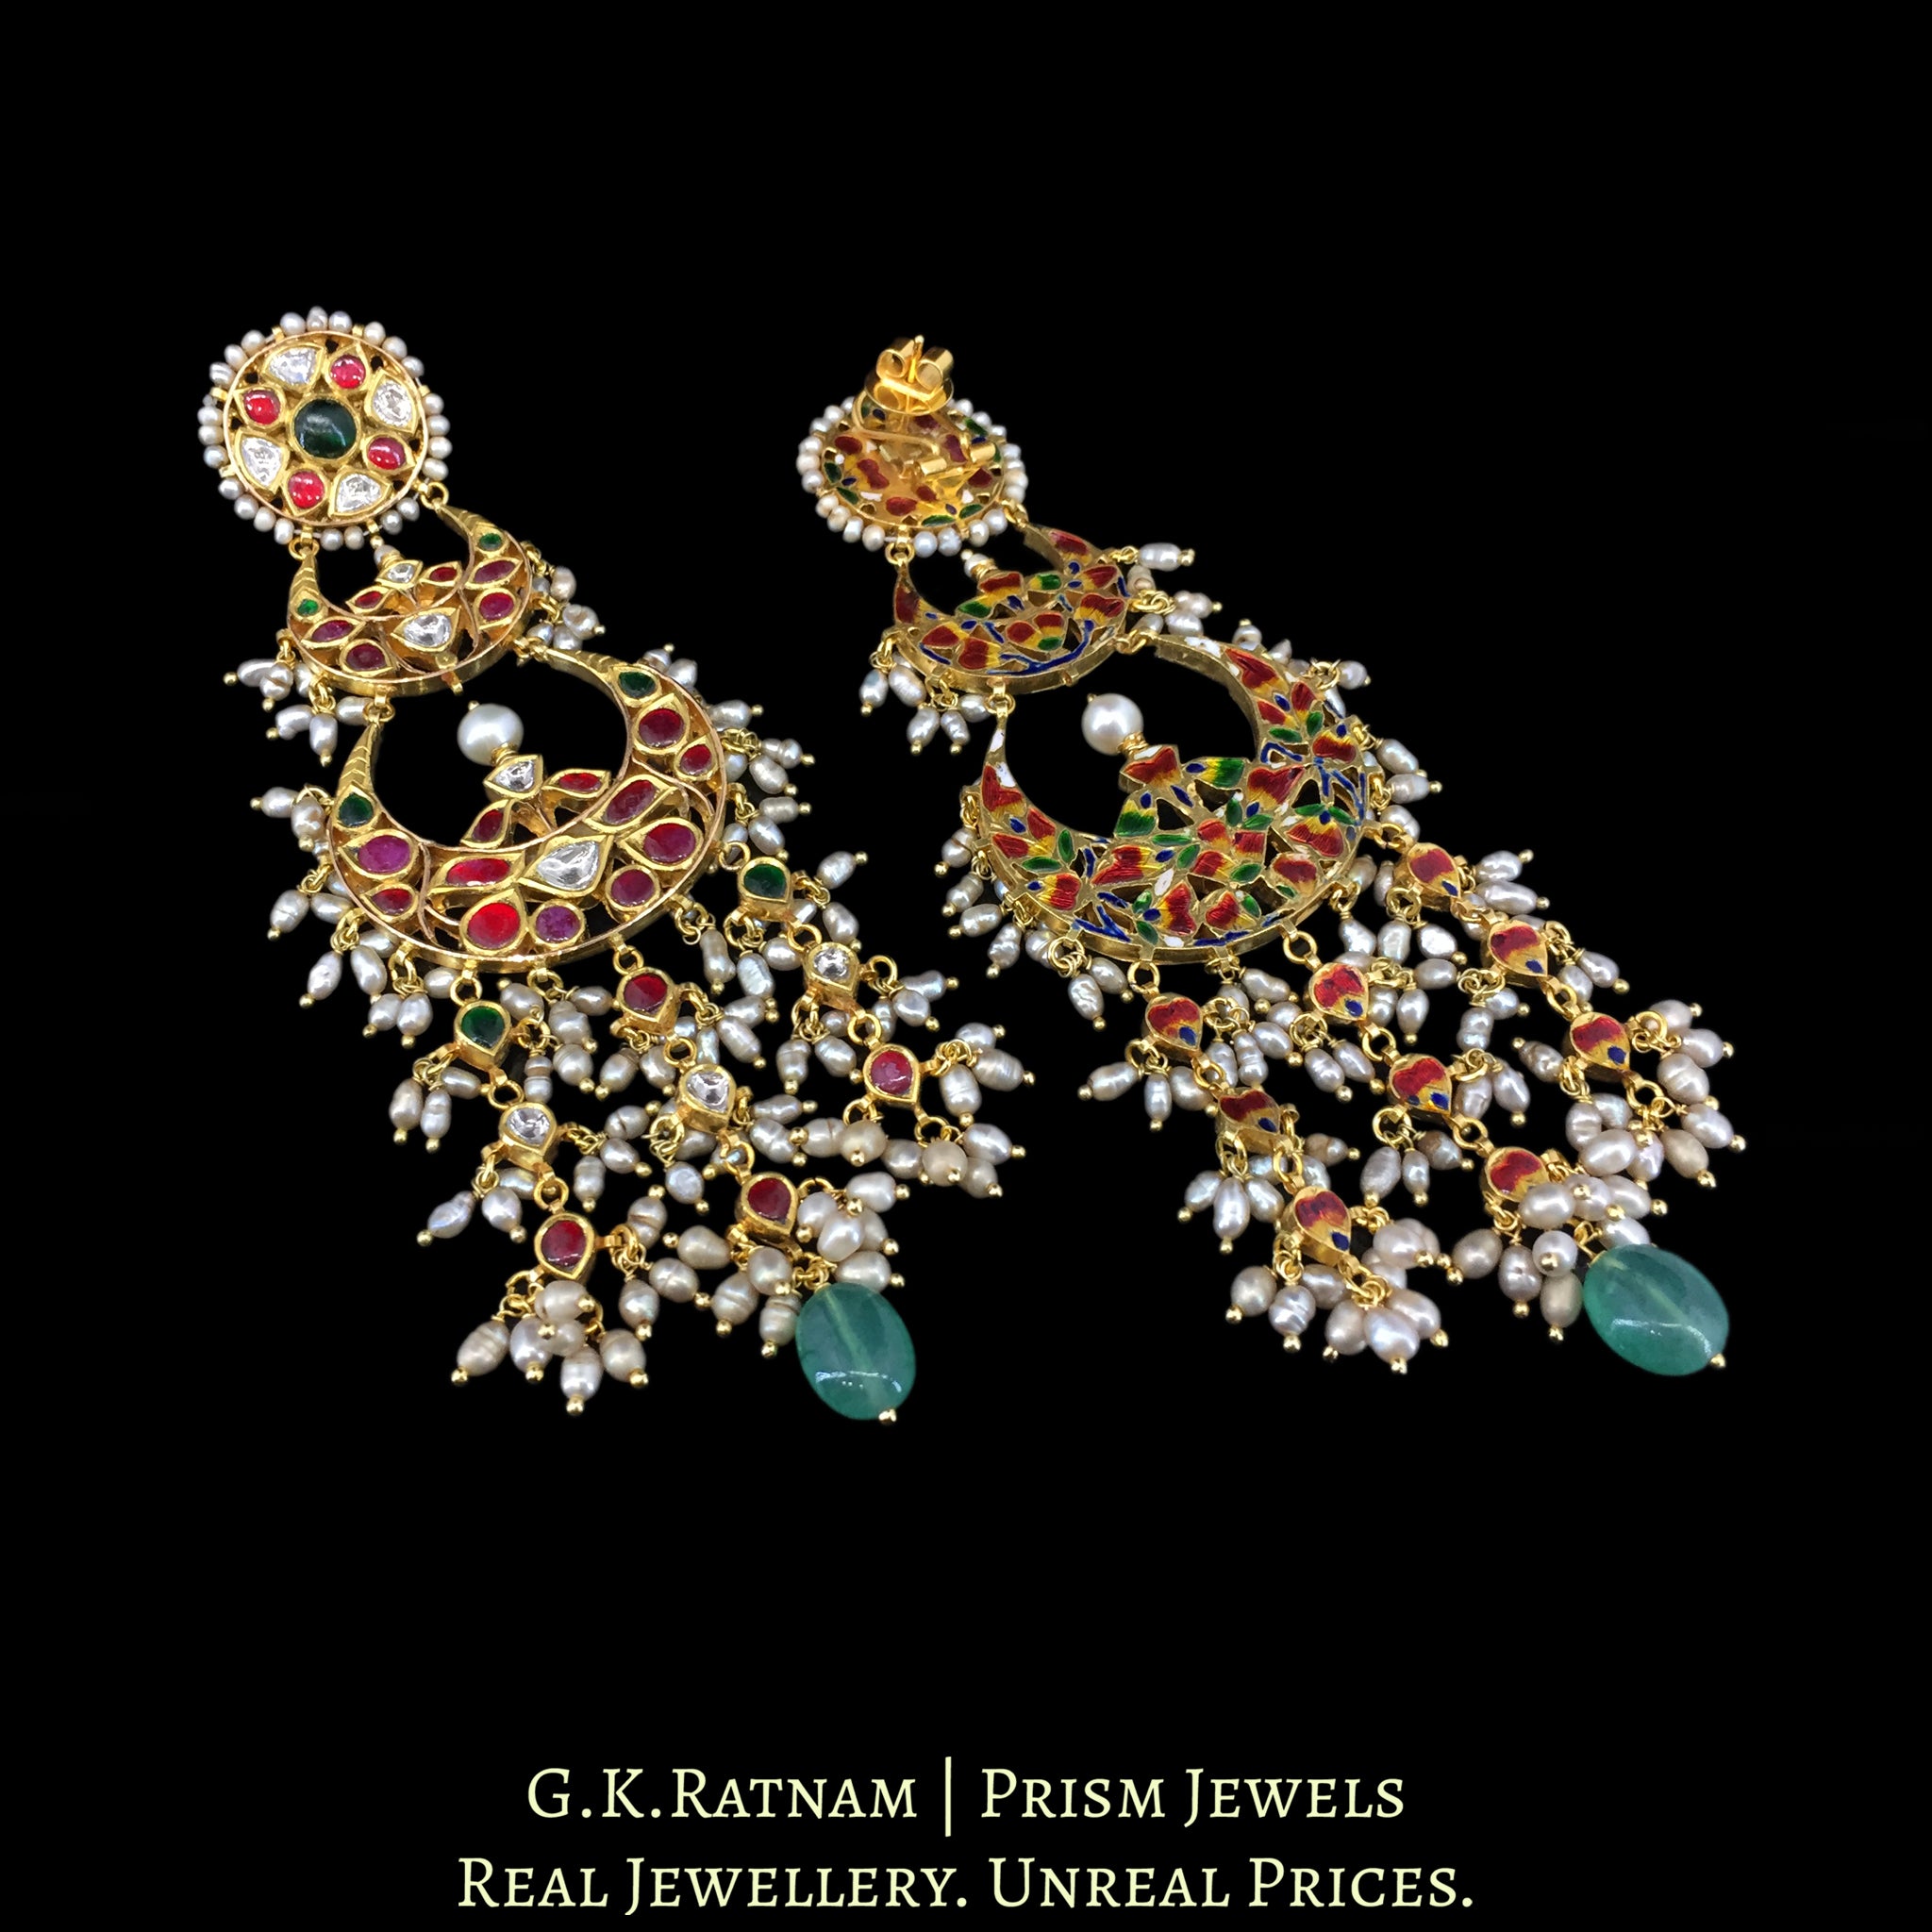 18k Gold and Diamond Polki Chand Bali Earring Pair with Antiqued Freshwater Pearls